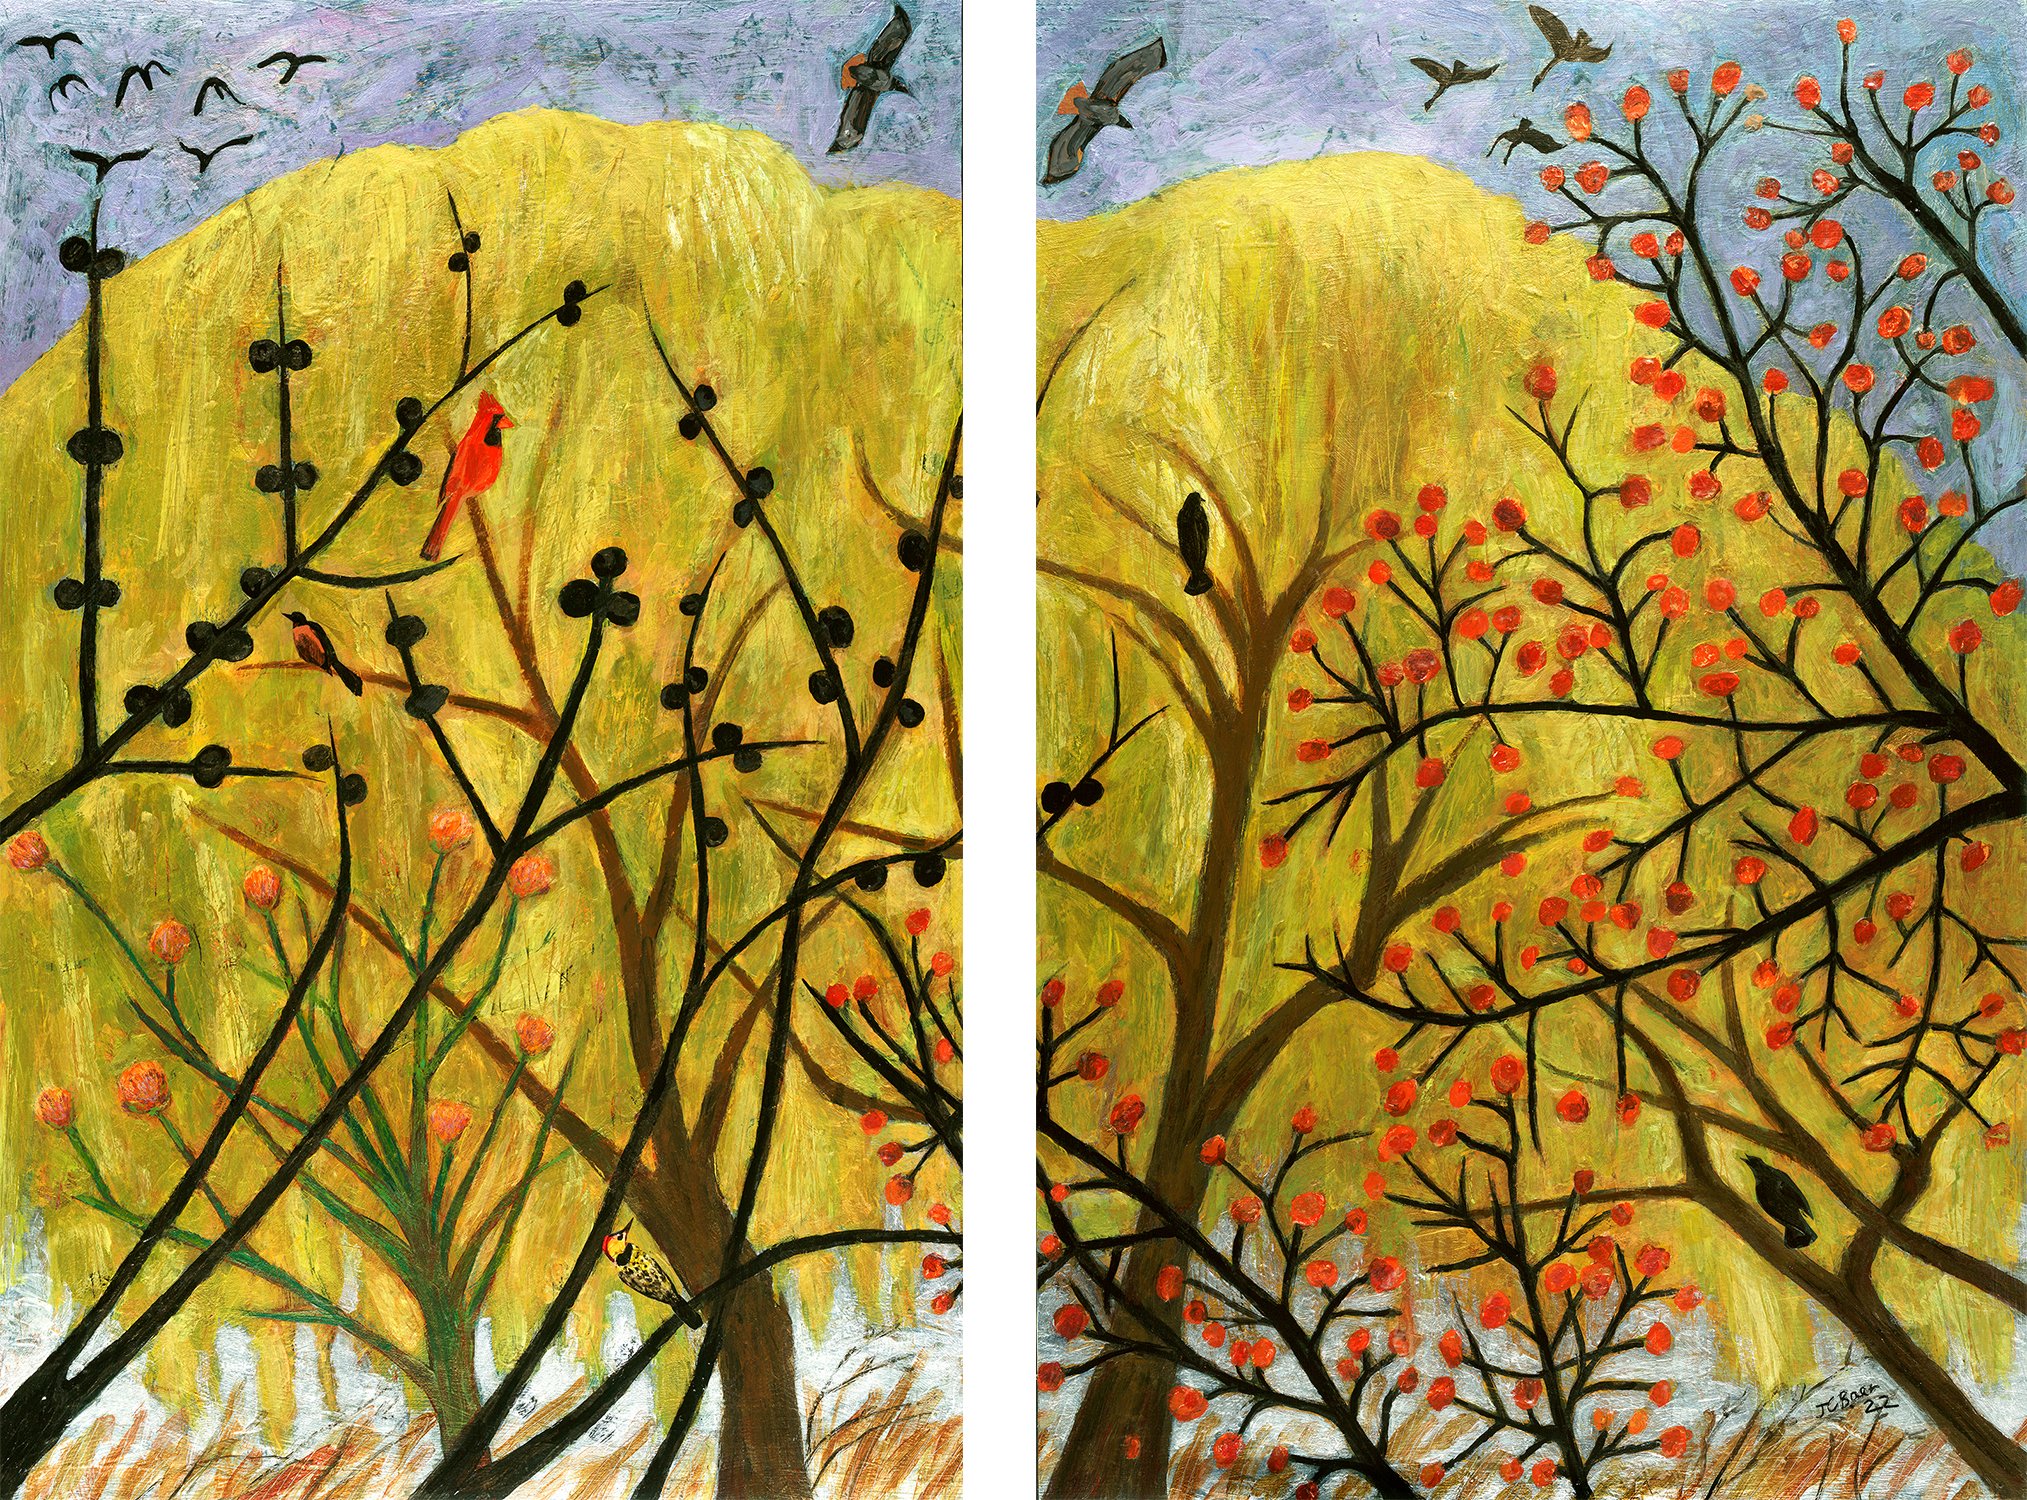 Willow Hawk, 2022, acrylic and collage on paper, diptych: overall dimensions 33x44”, SOLD